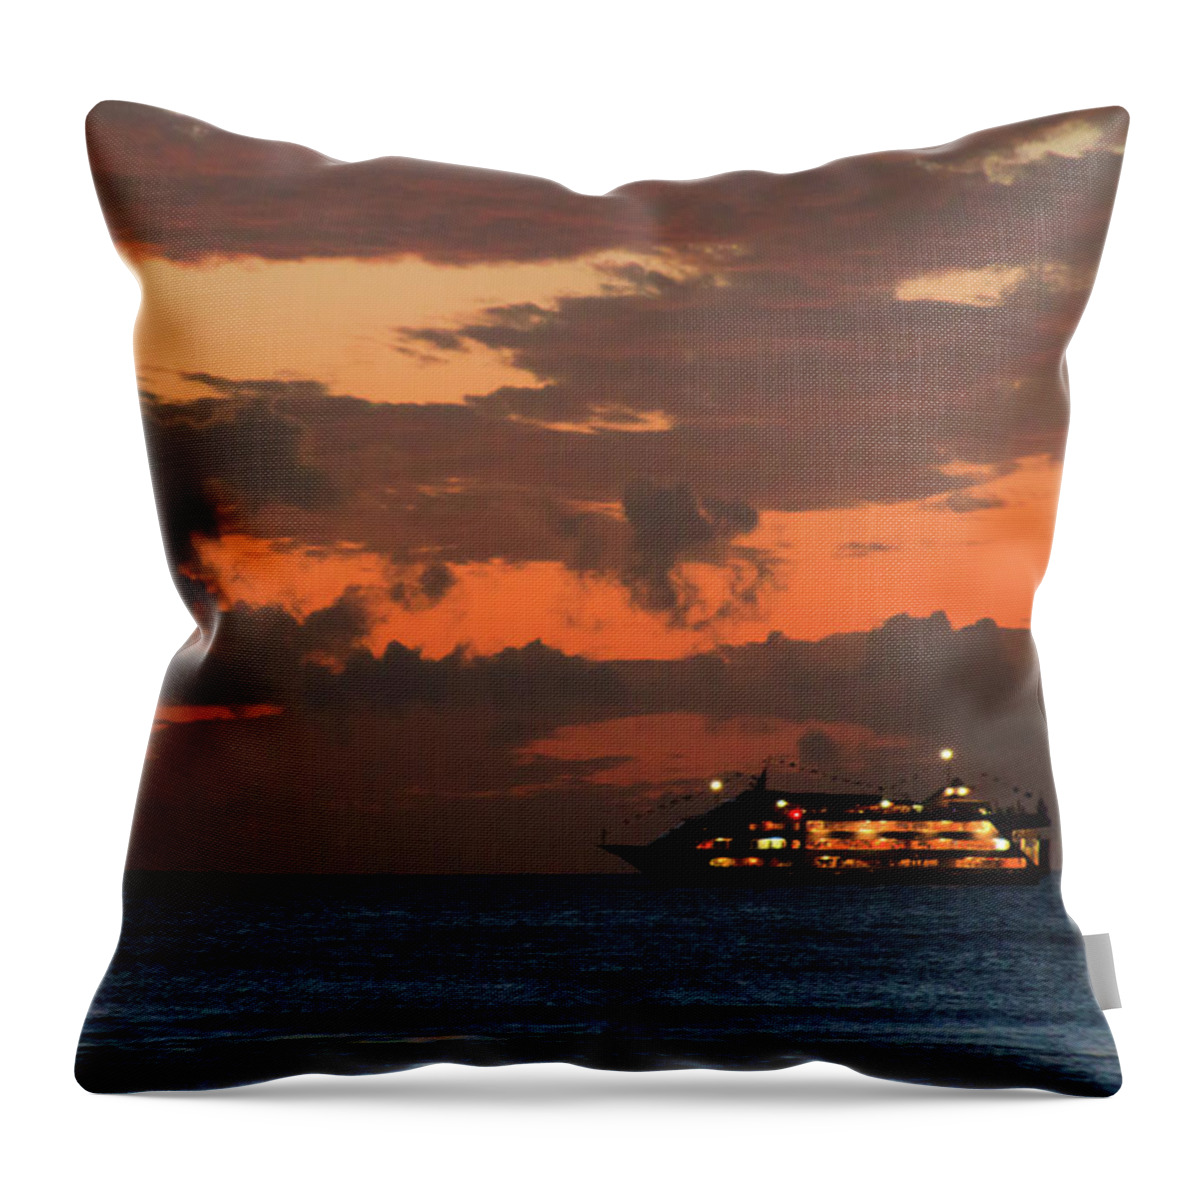 Hawaii Throw Pillow featuring the photograph Sunset Cruise by Briand Sanderson